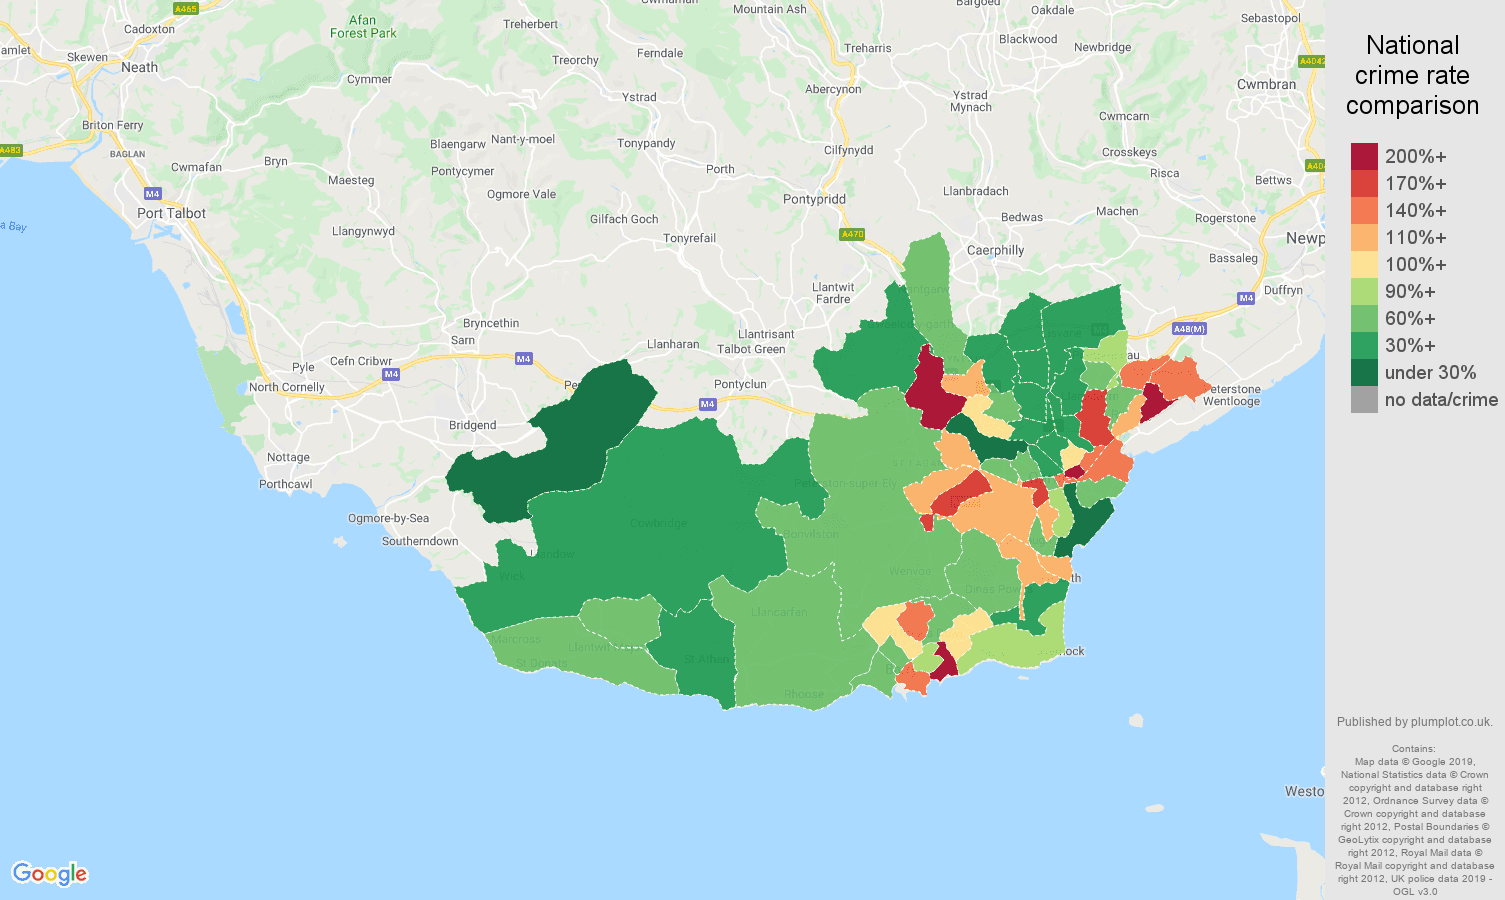 South Glamorgan other crime rate comparison map